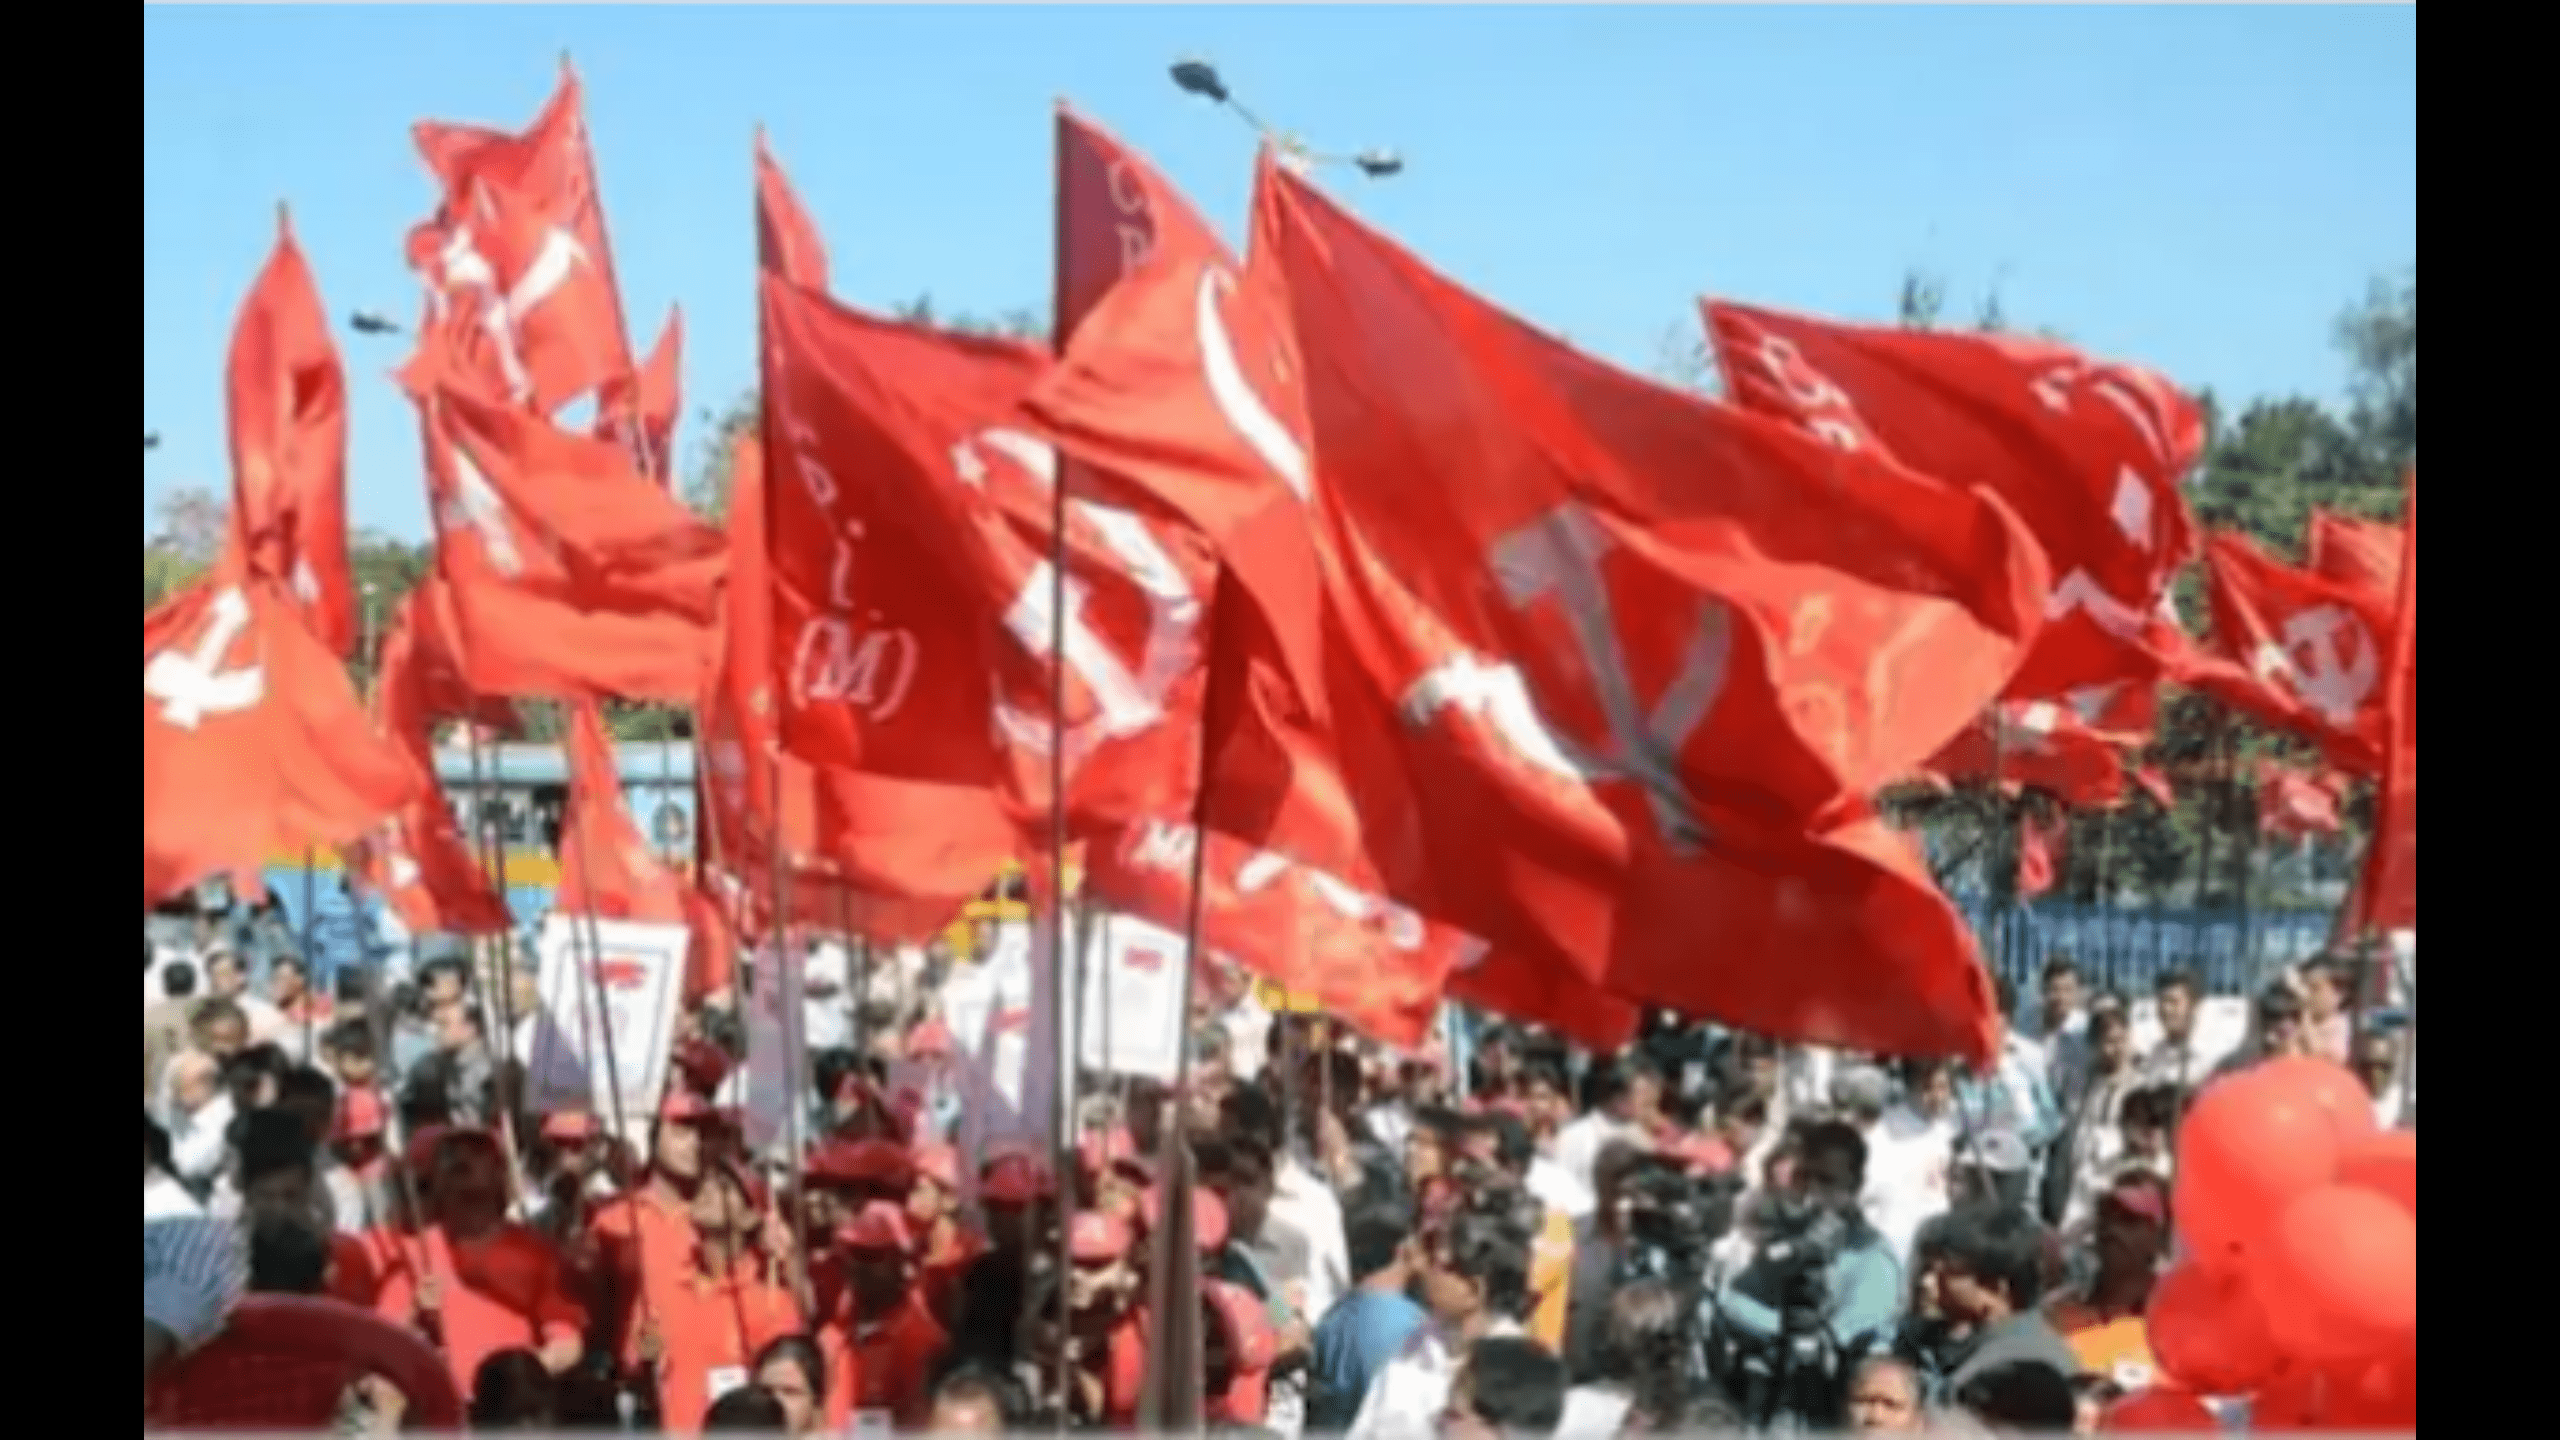 Bengal: CPI(M) Leader, Cadres Face 'False Case' From TMC in West